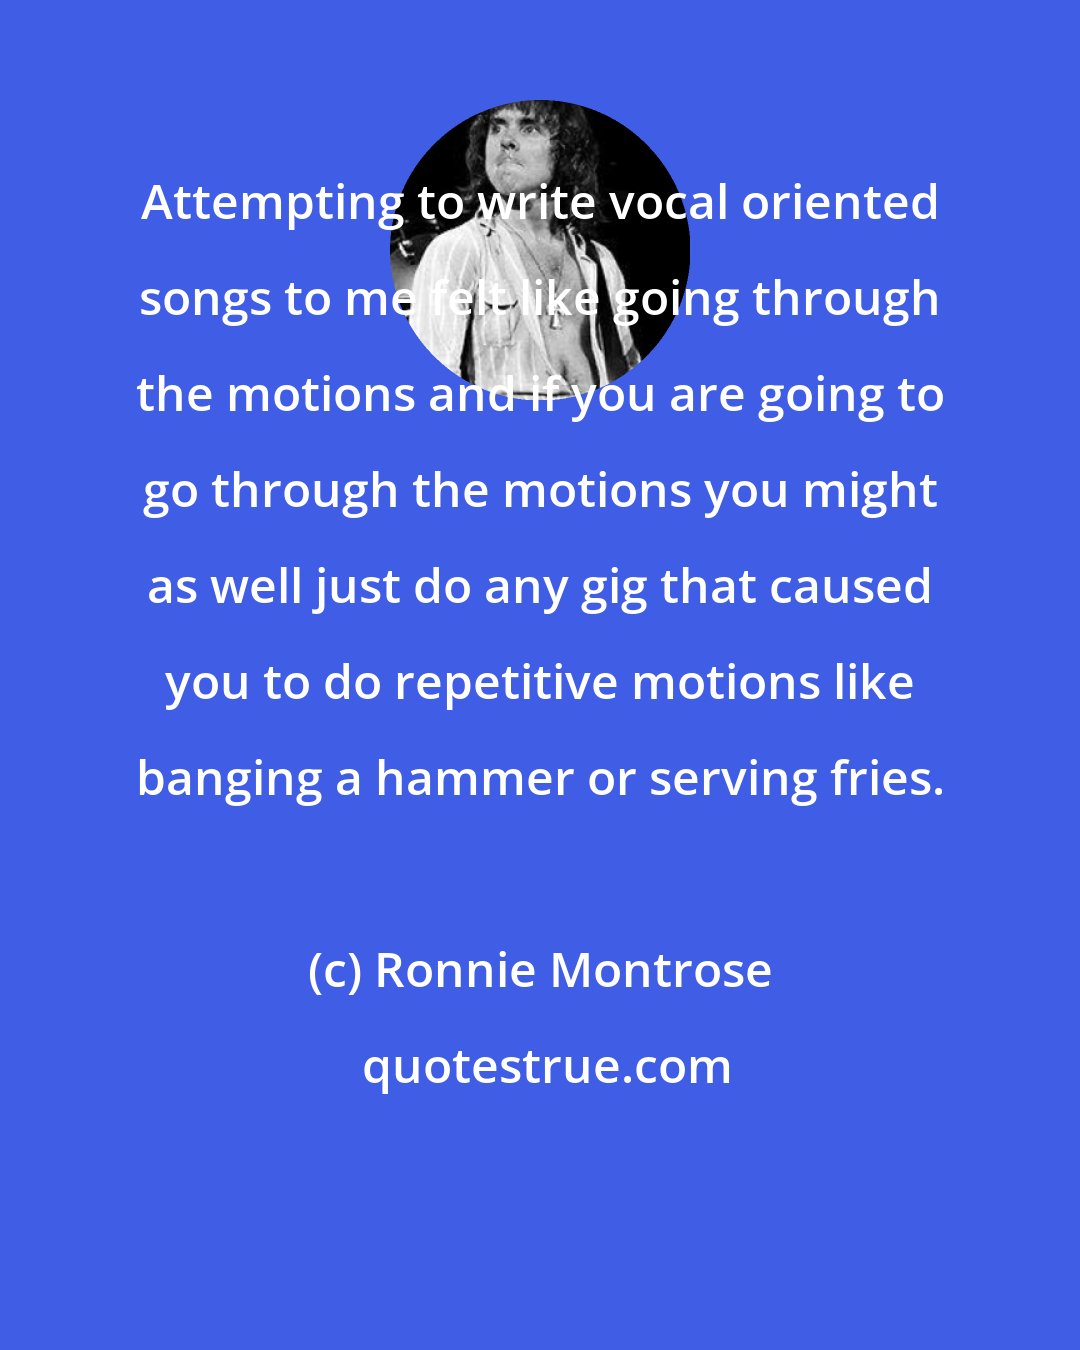 Ronnie Montrose: Attempting to write vocal oriented songs to me felt like going through the motions and if you are going to go through the motions you might as well just do any gig that caused you to do repetitive motions like banging a hammer or serving fries.